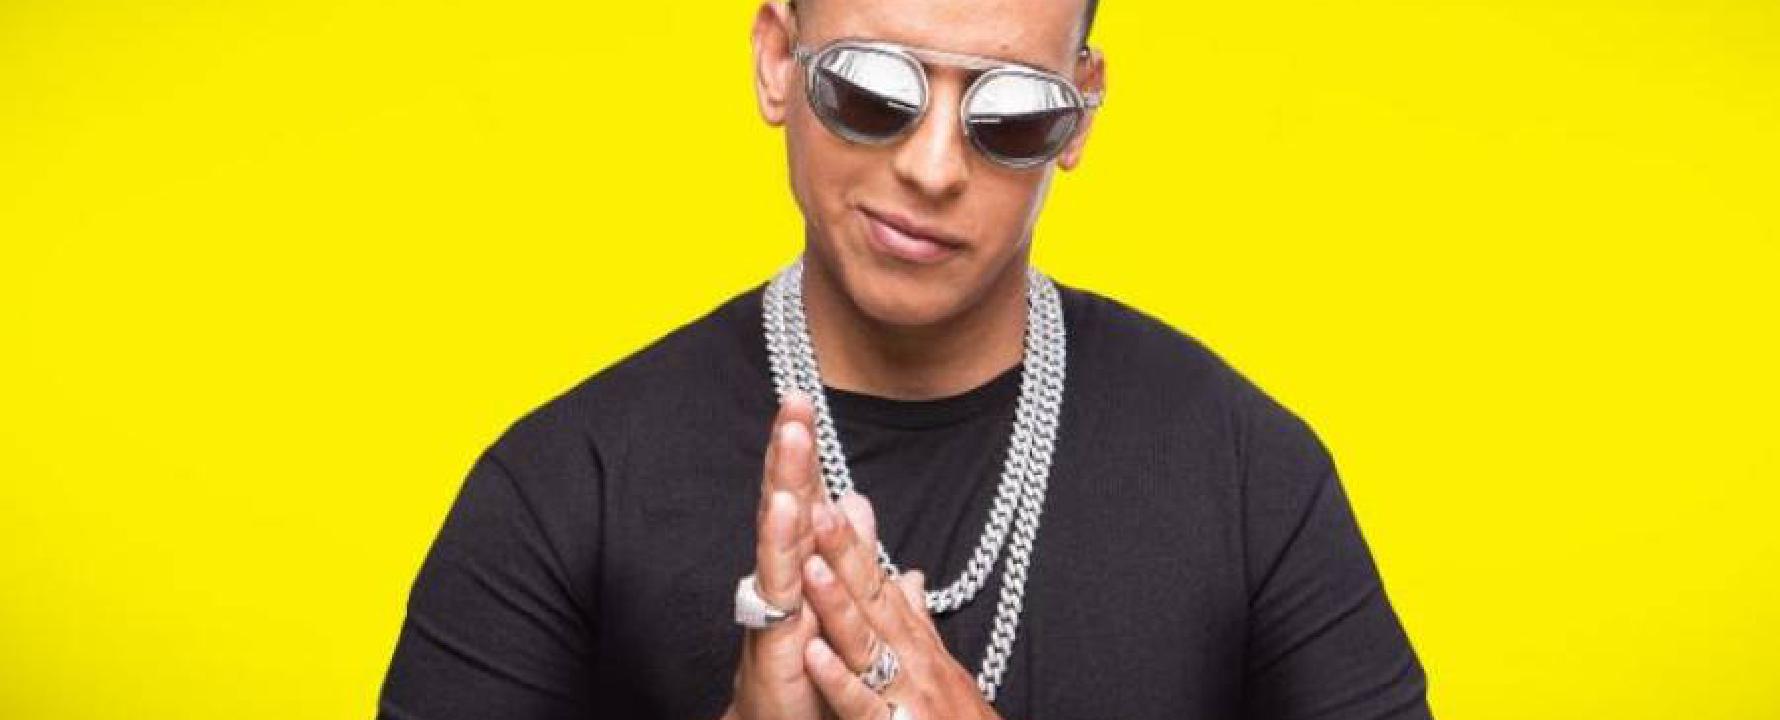 Photographie promotionnelle de Daddy Yankee.